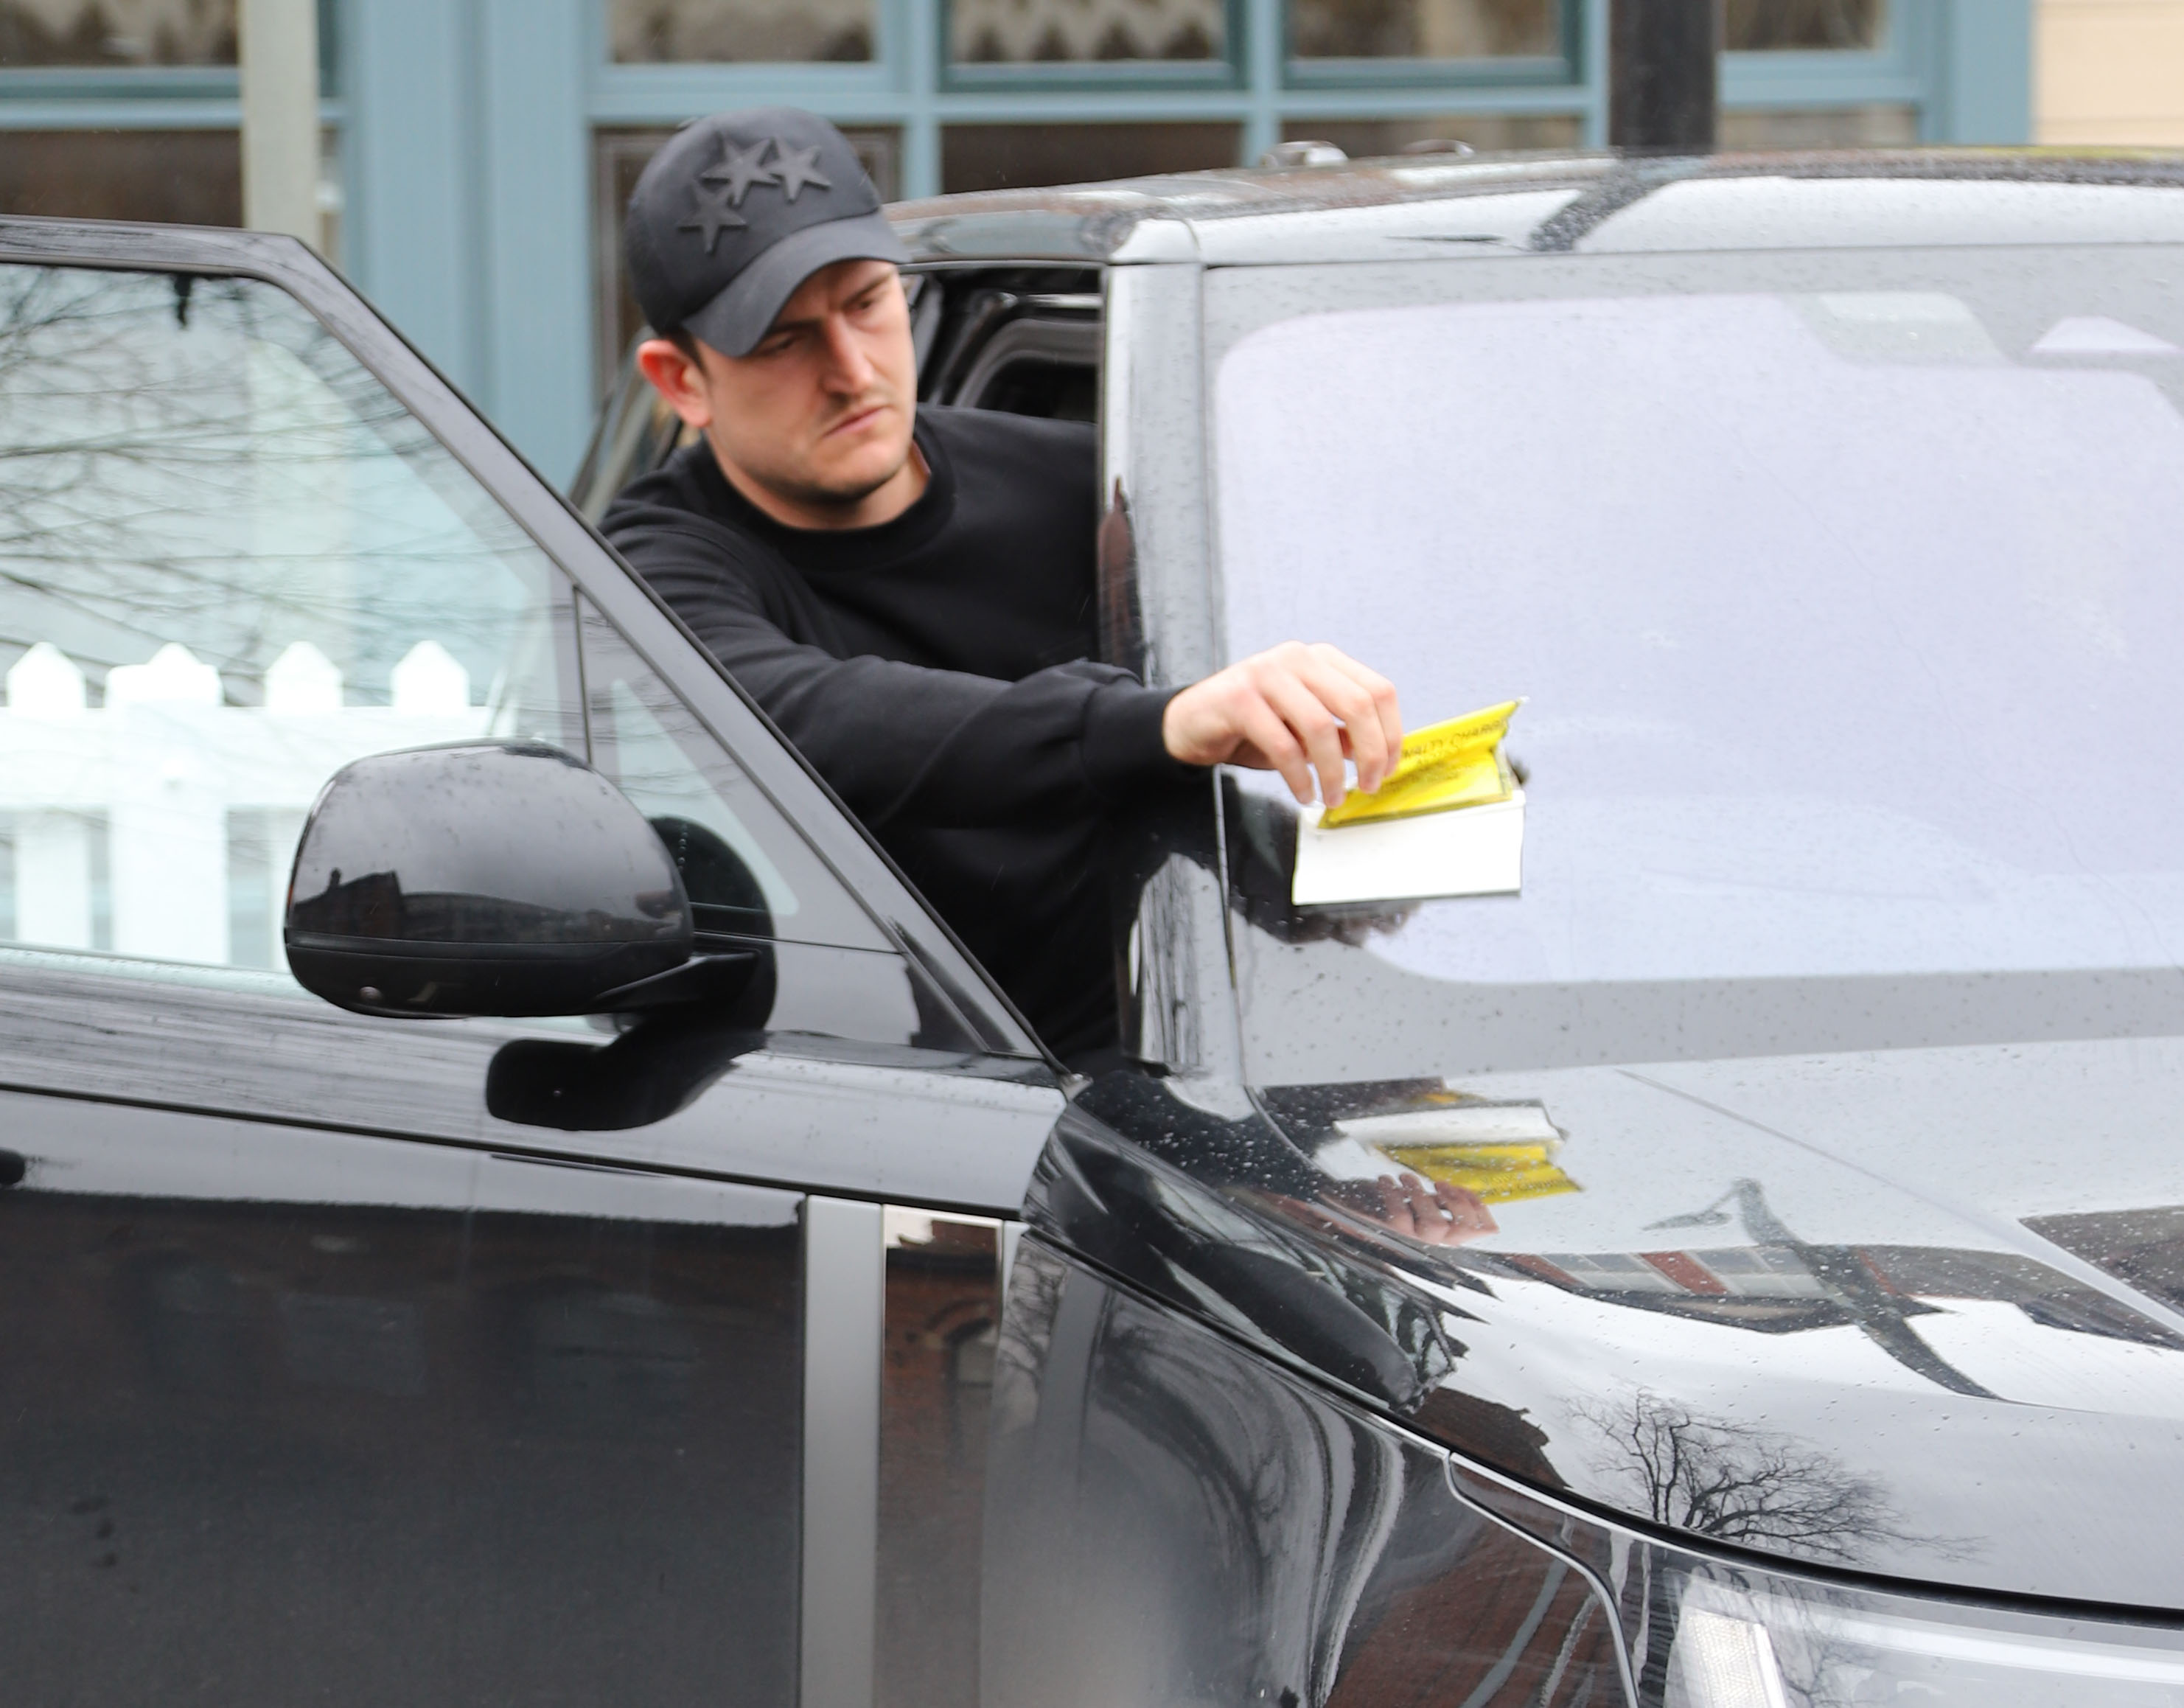 The England star was meeting his Manchester United teammates for some food